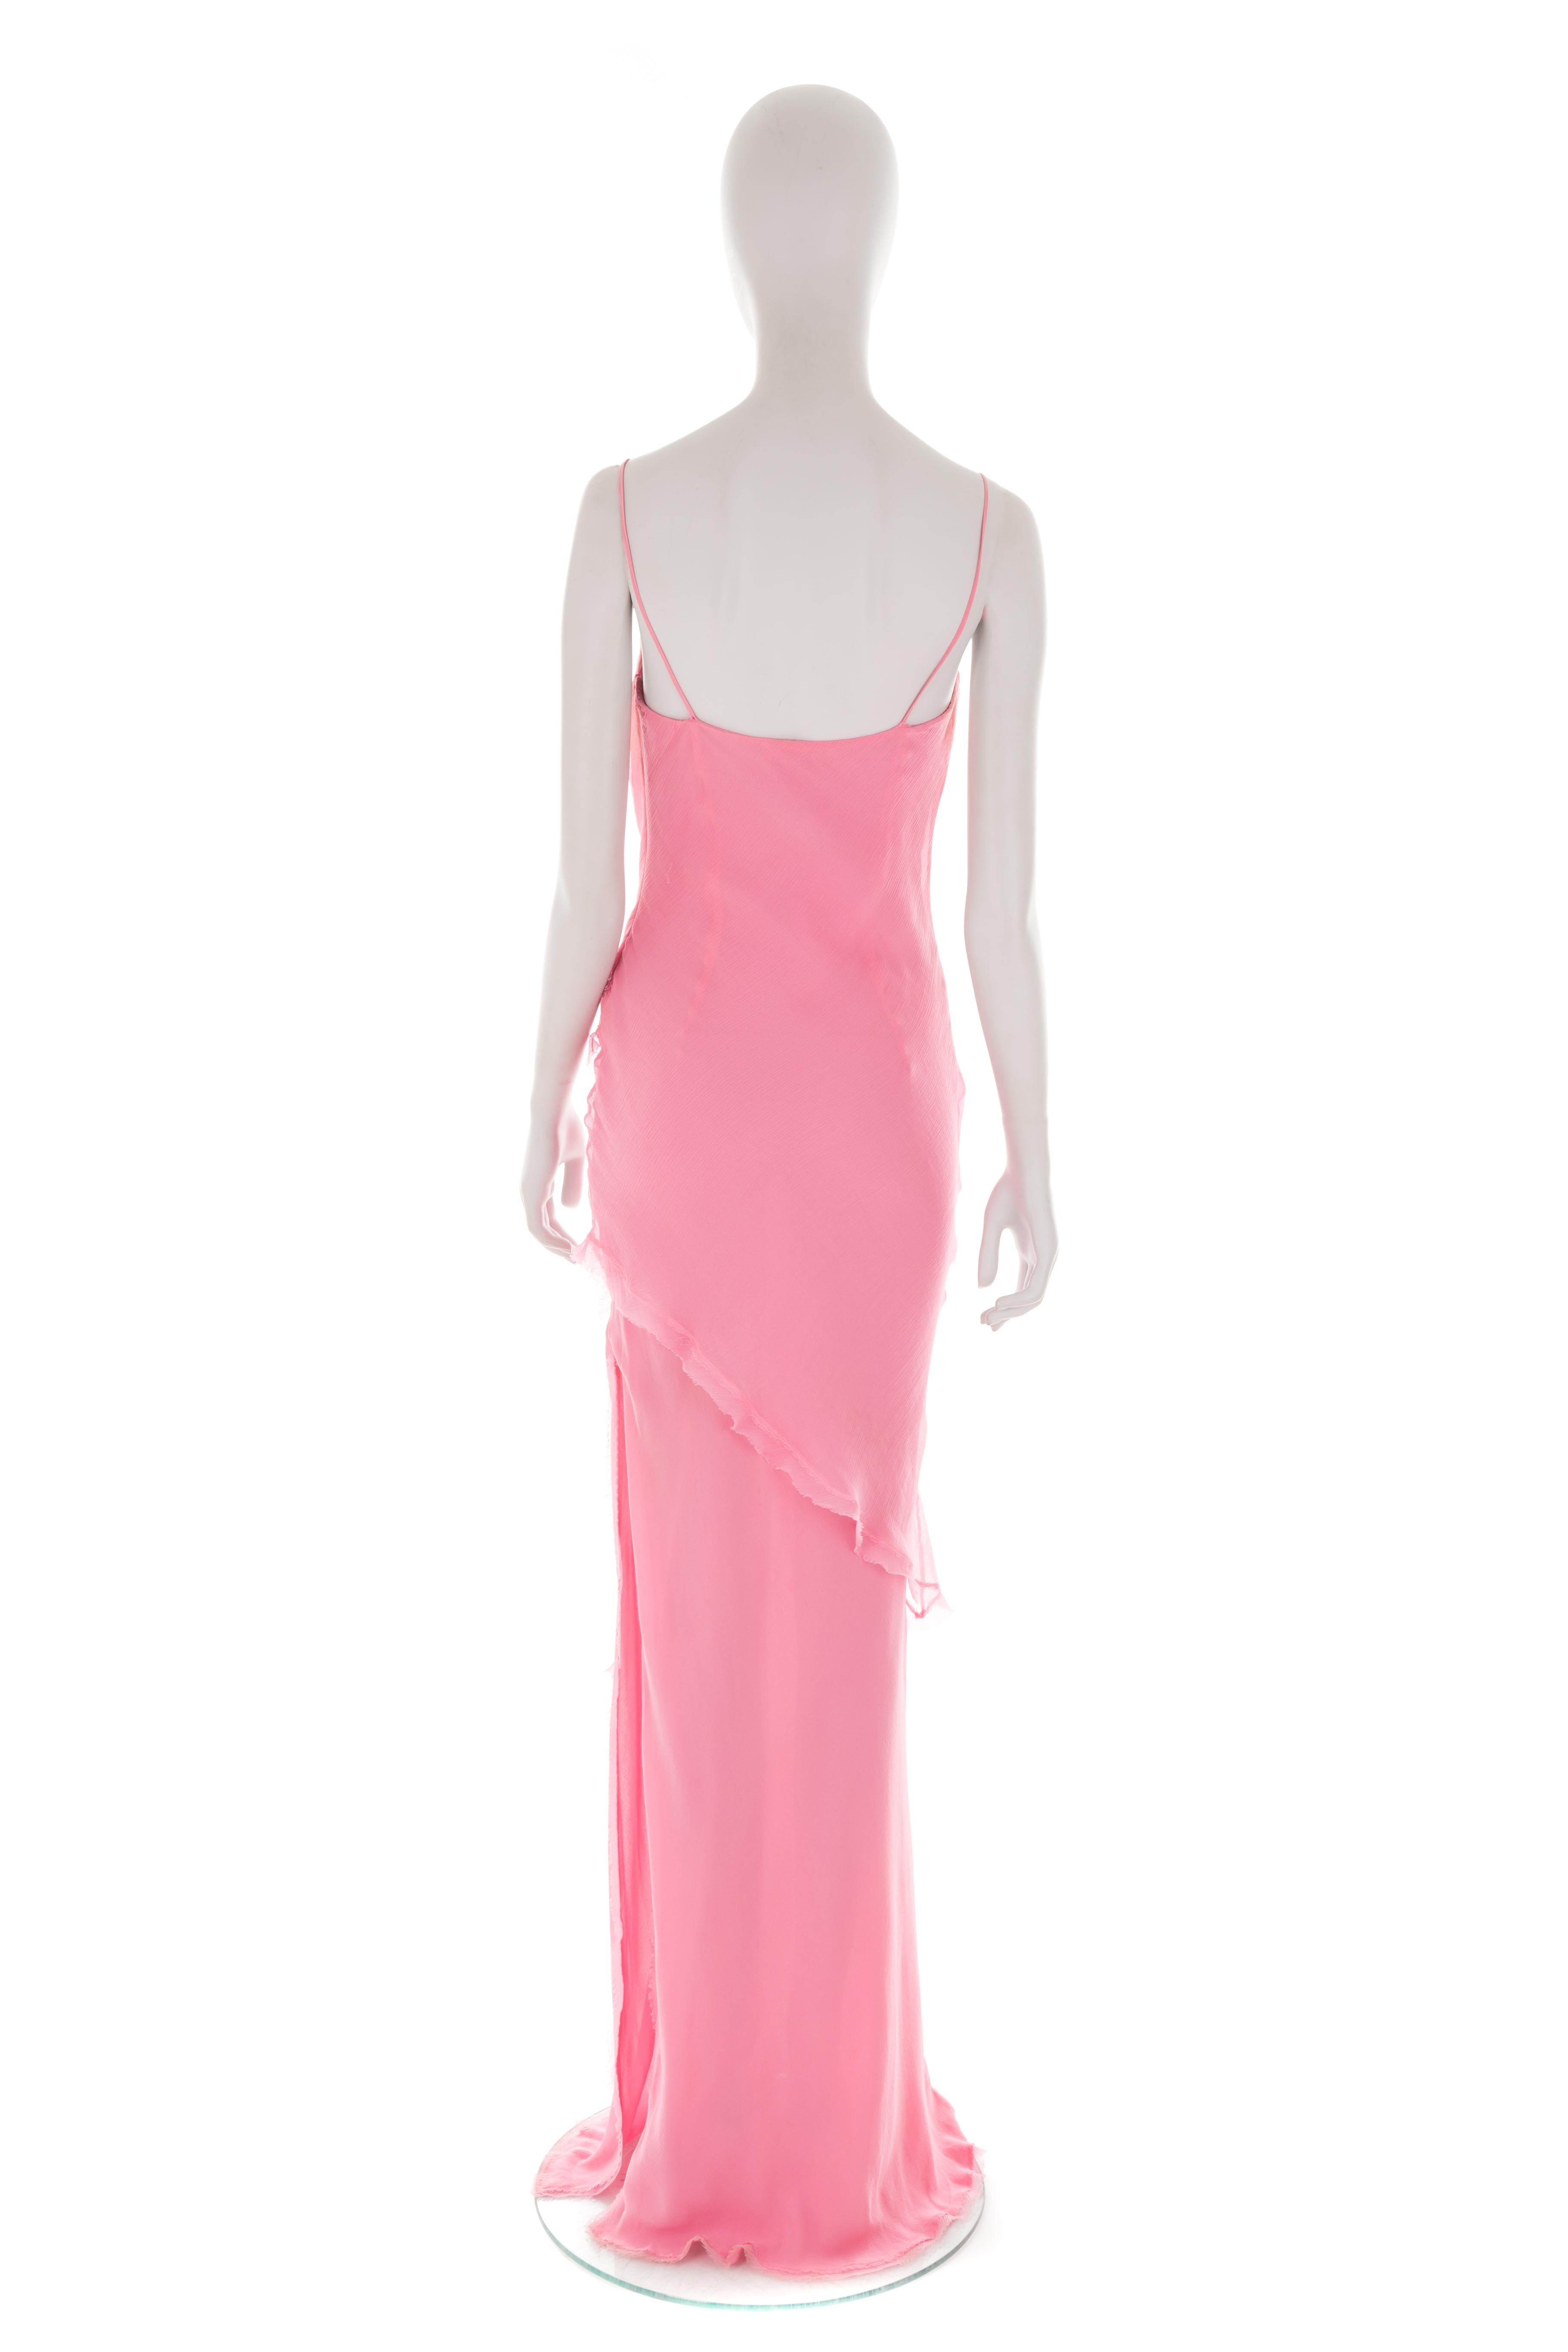 Ermanno Scervino S/S 2004 multi-layered pink chiffon gown with side slit For Sale 2